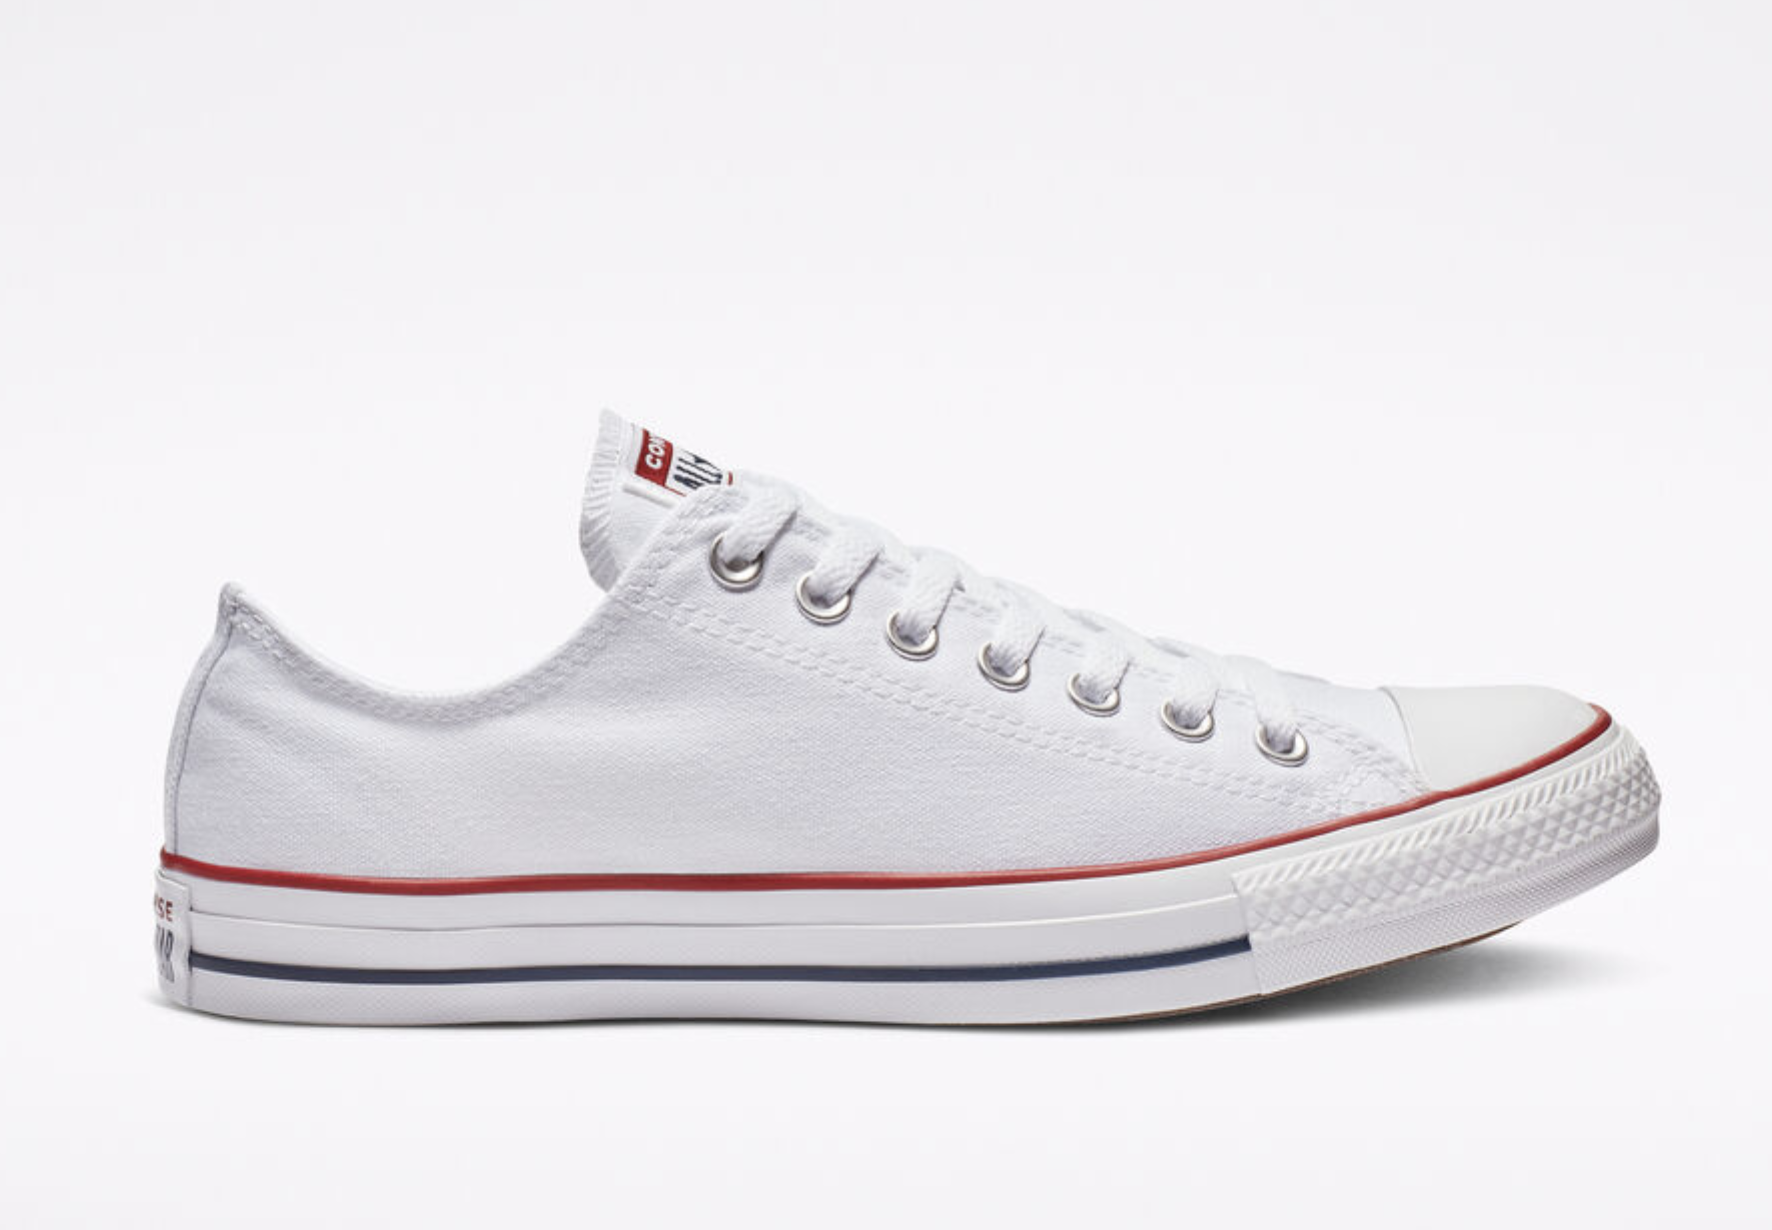 Converse.png